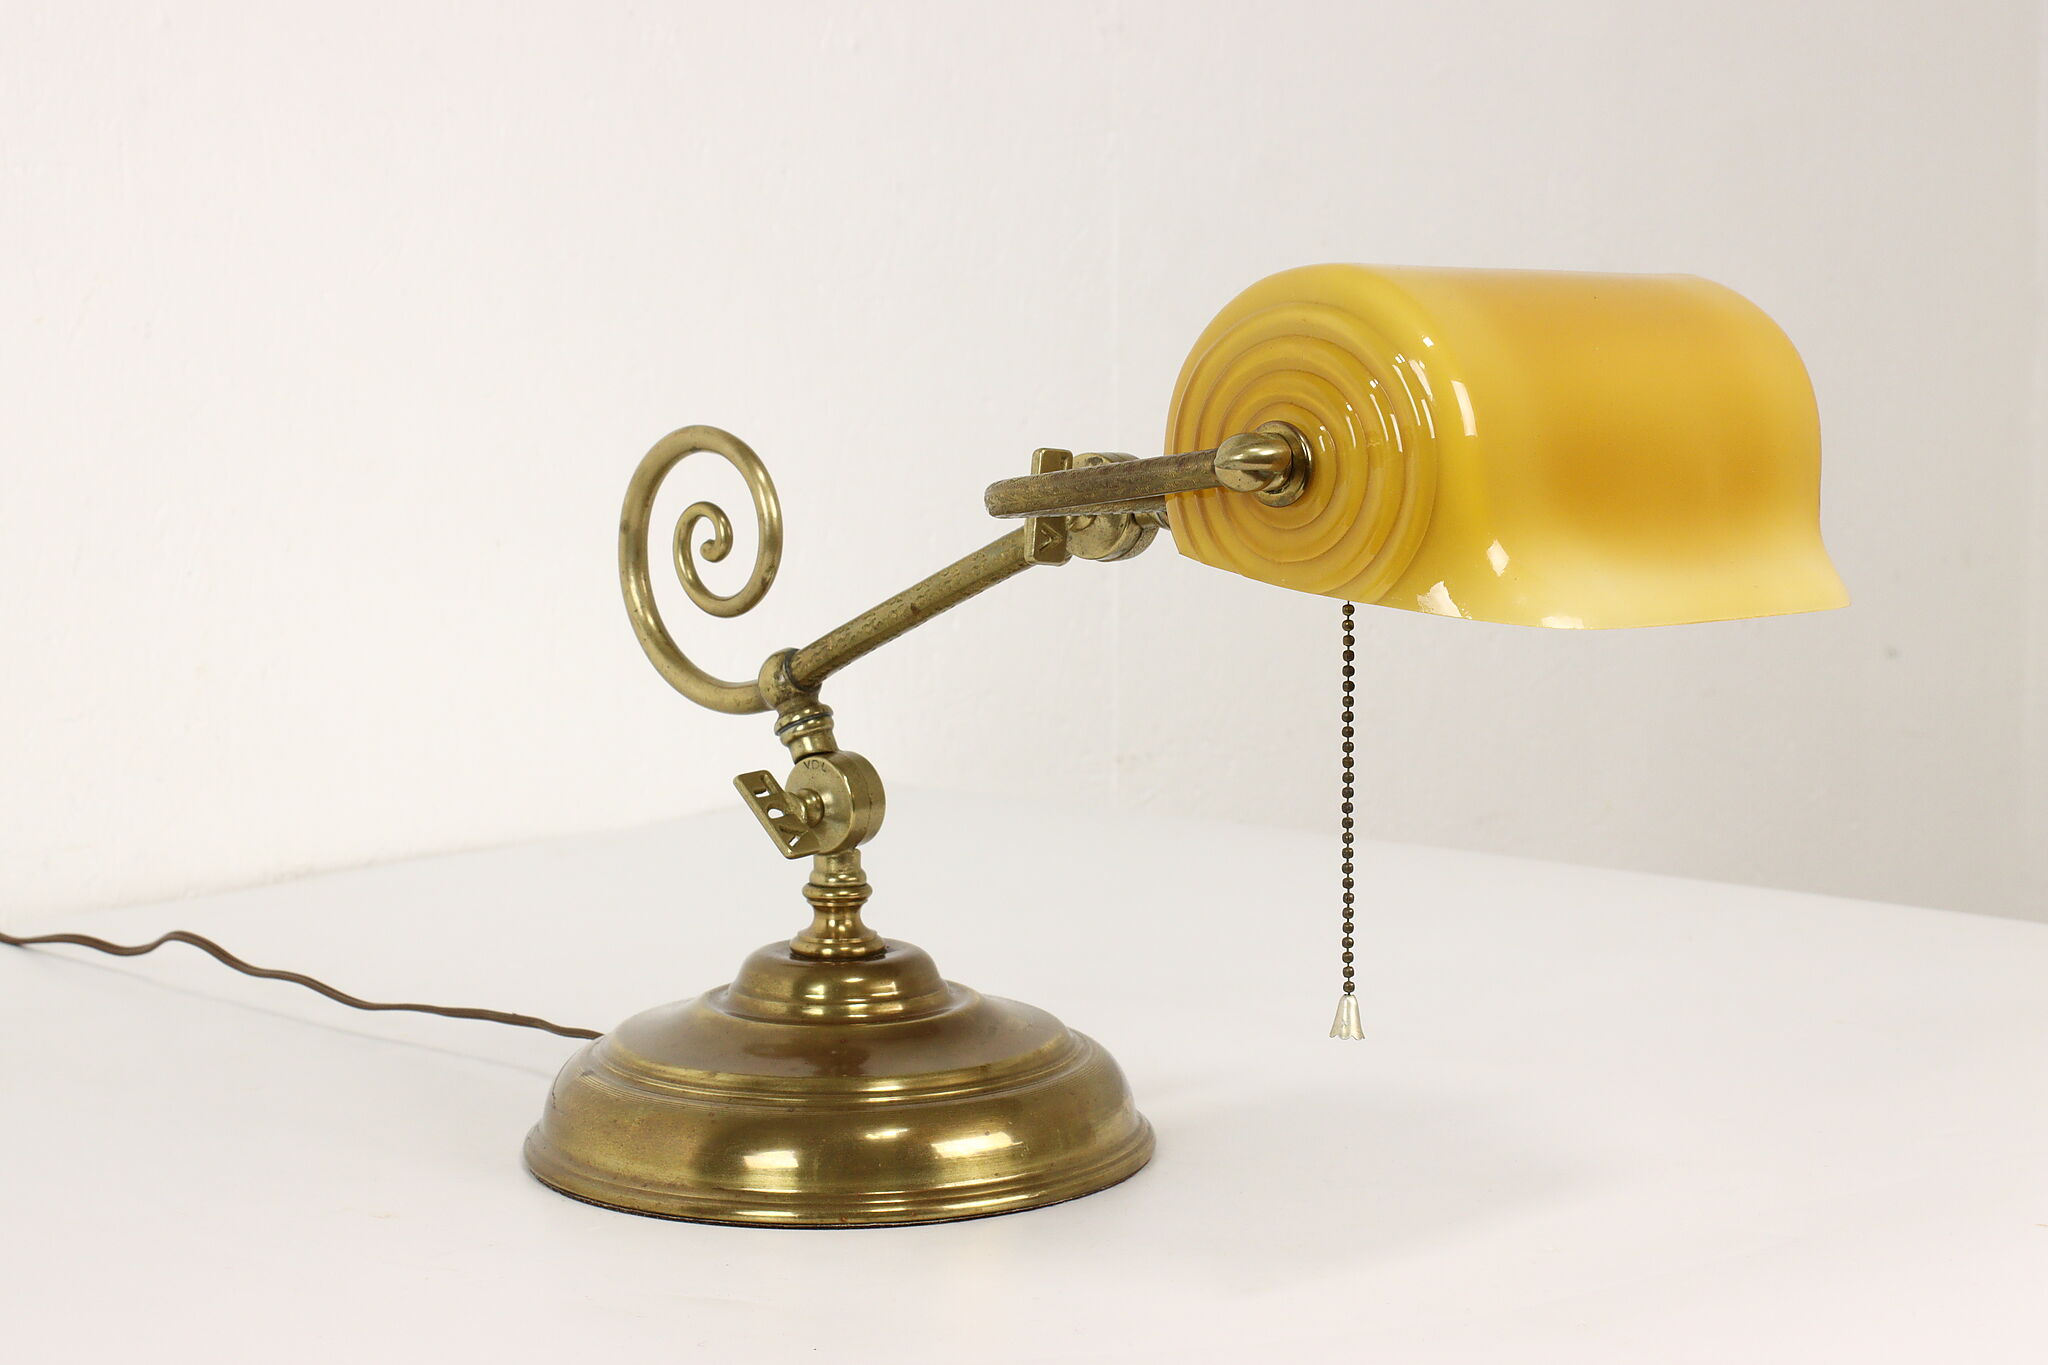 Bankers Lamp SMALL, Antique Brass finish & opal glass shade